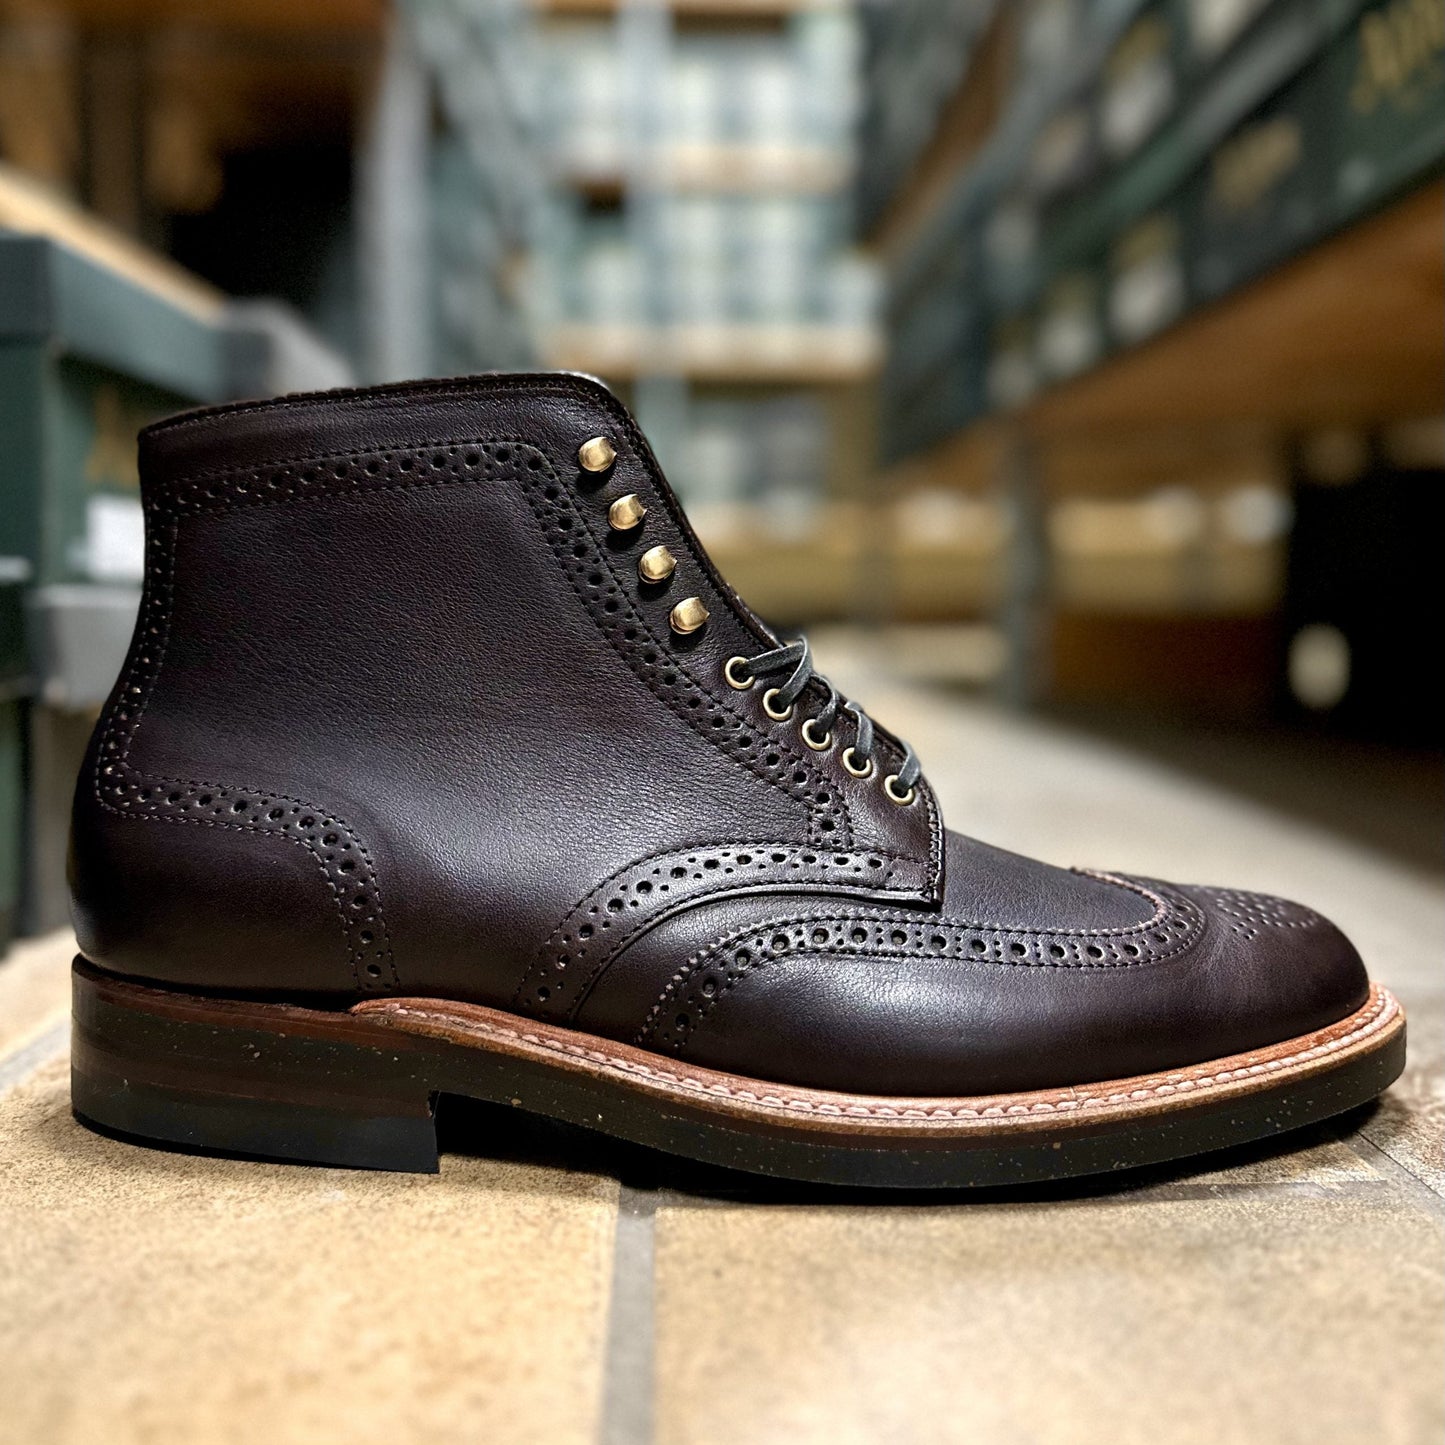 D2802H - Wing Tip “Yield” Boots in Arabica Lux